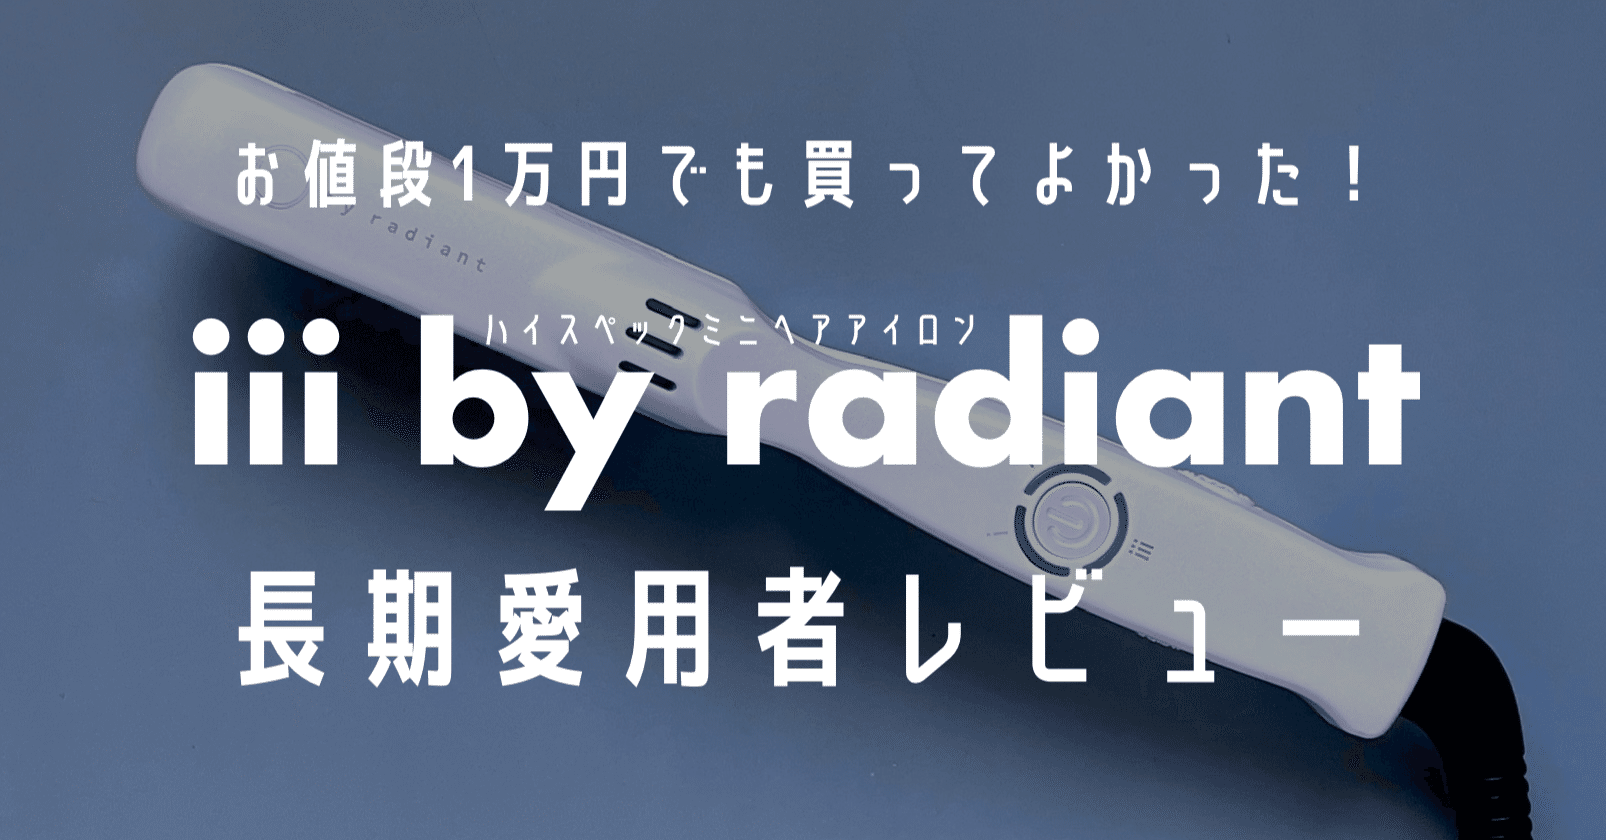 iii by radiant ミニアイロン スリーバイラディアント